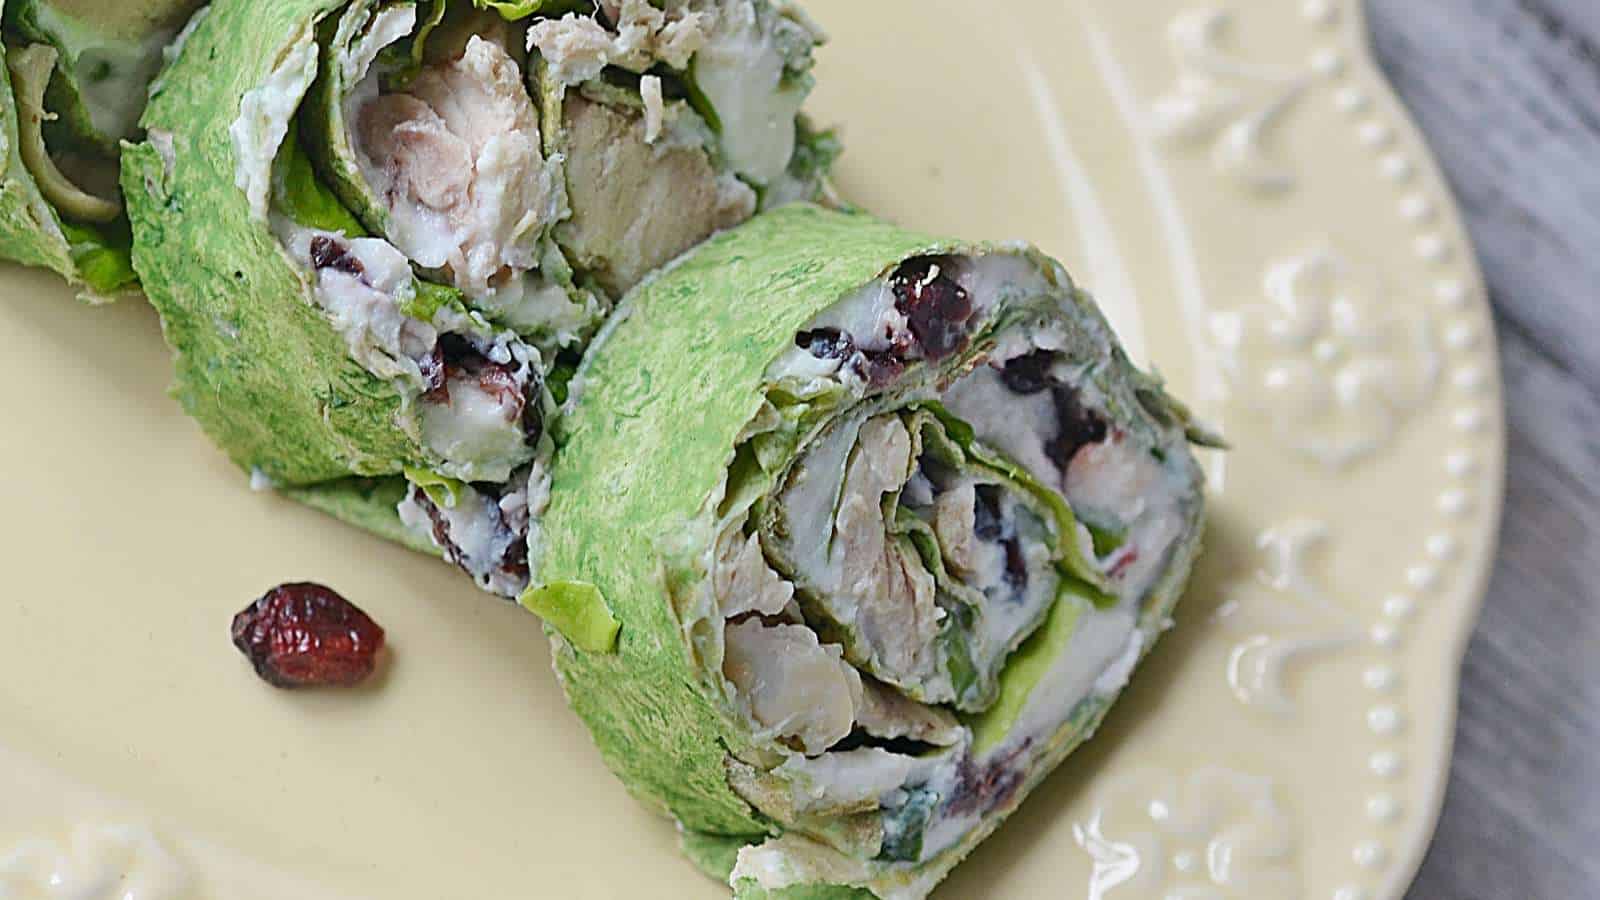 A plate with a green wrap with cranberries and turkey on it.